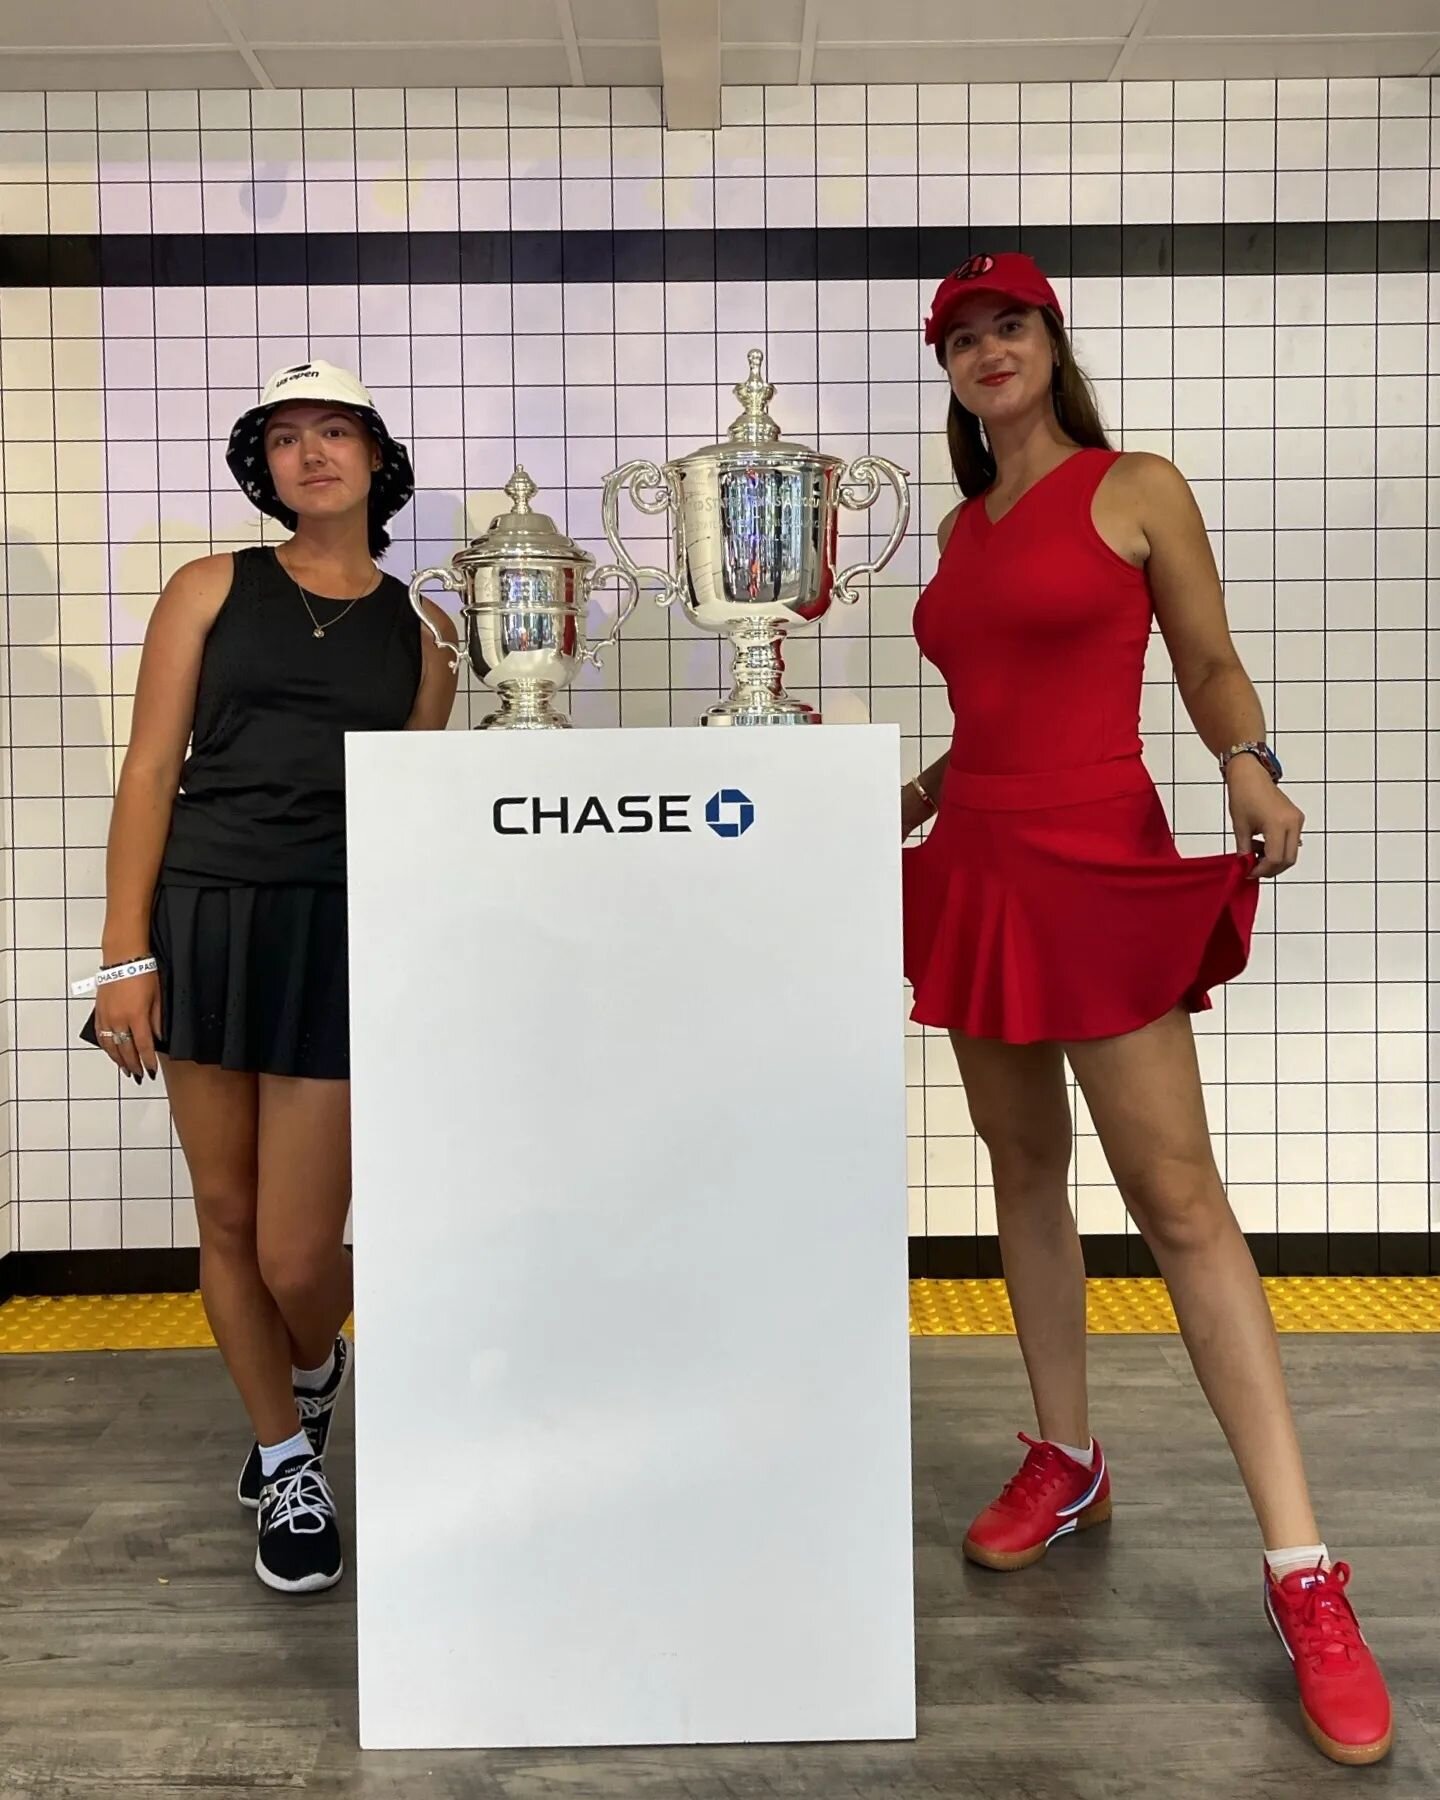 @usopen 2022 it's been real! Beautiful outfits by @icourttennis 
DM us for -10% off ! 🎾💟✨️